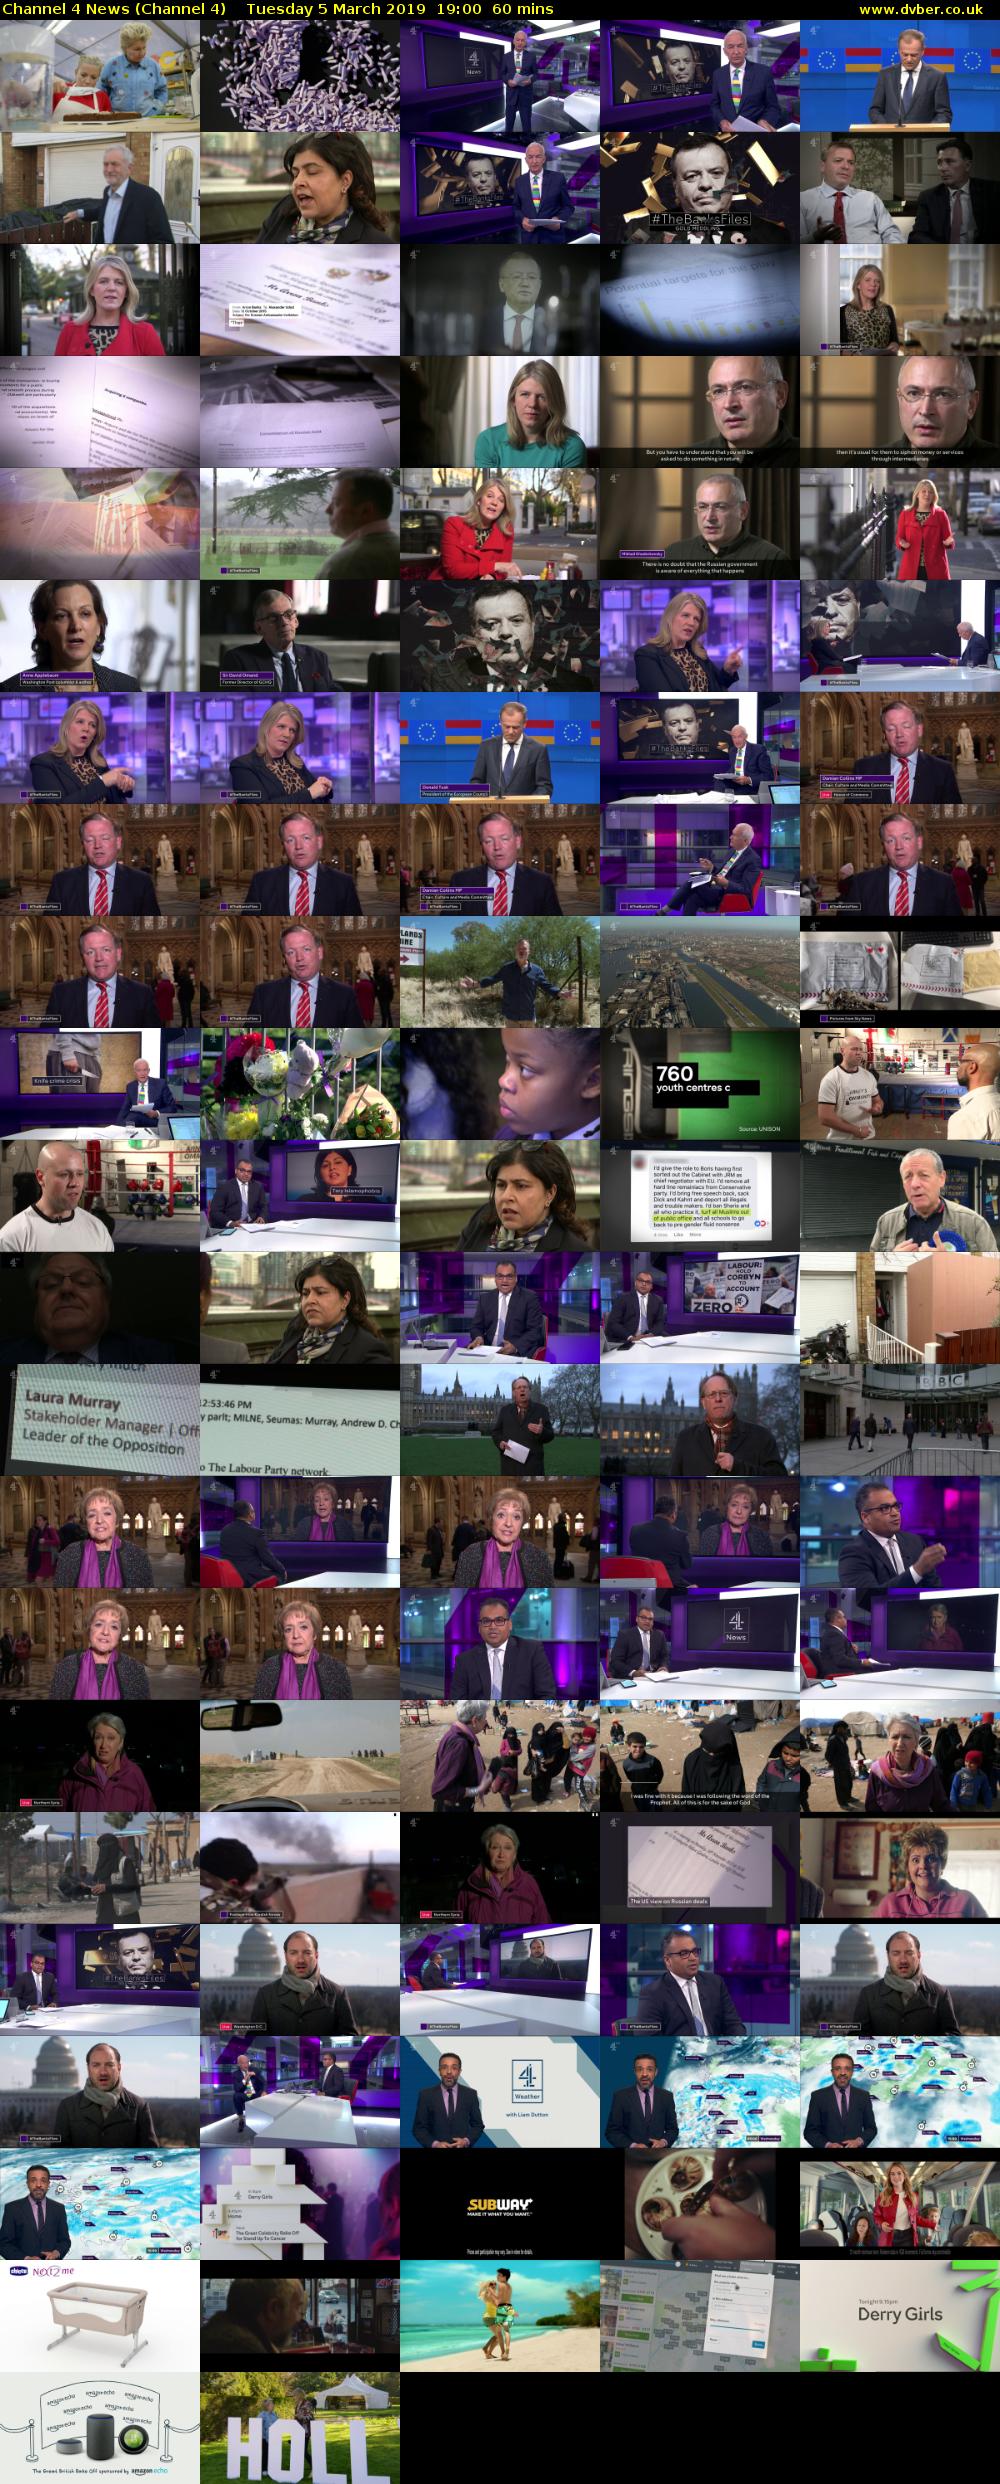 Channel 4 News (Channel 4) Tuesday 5 March 2019 19:00 - 20:00